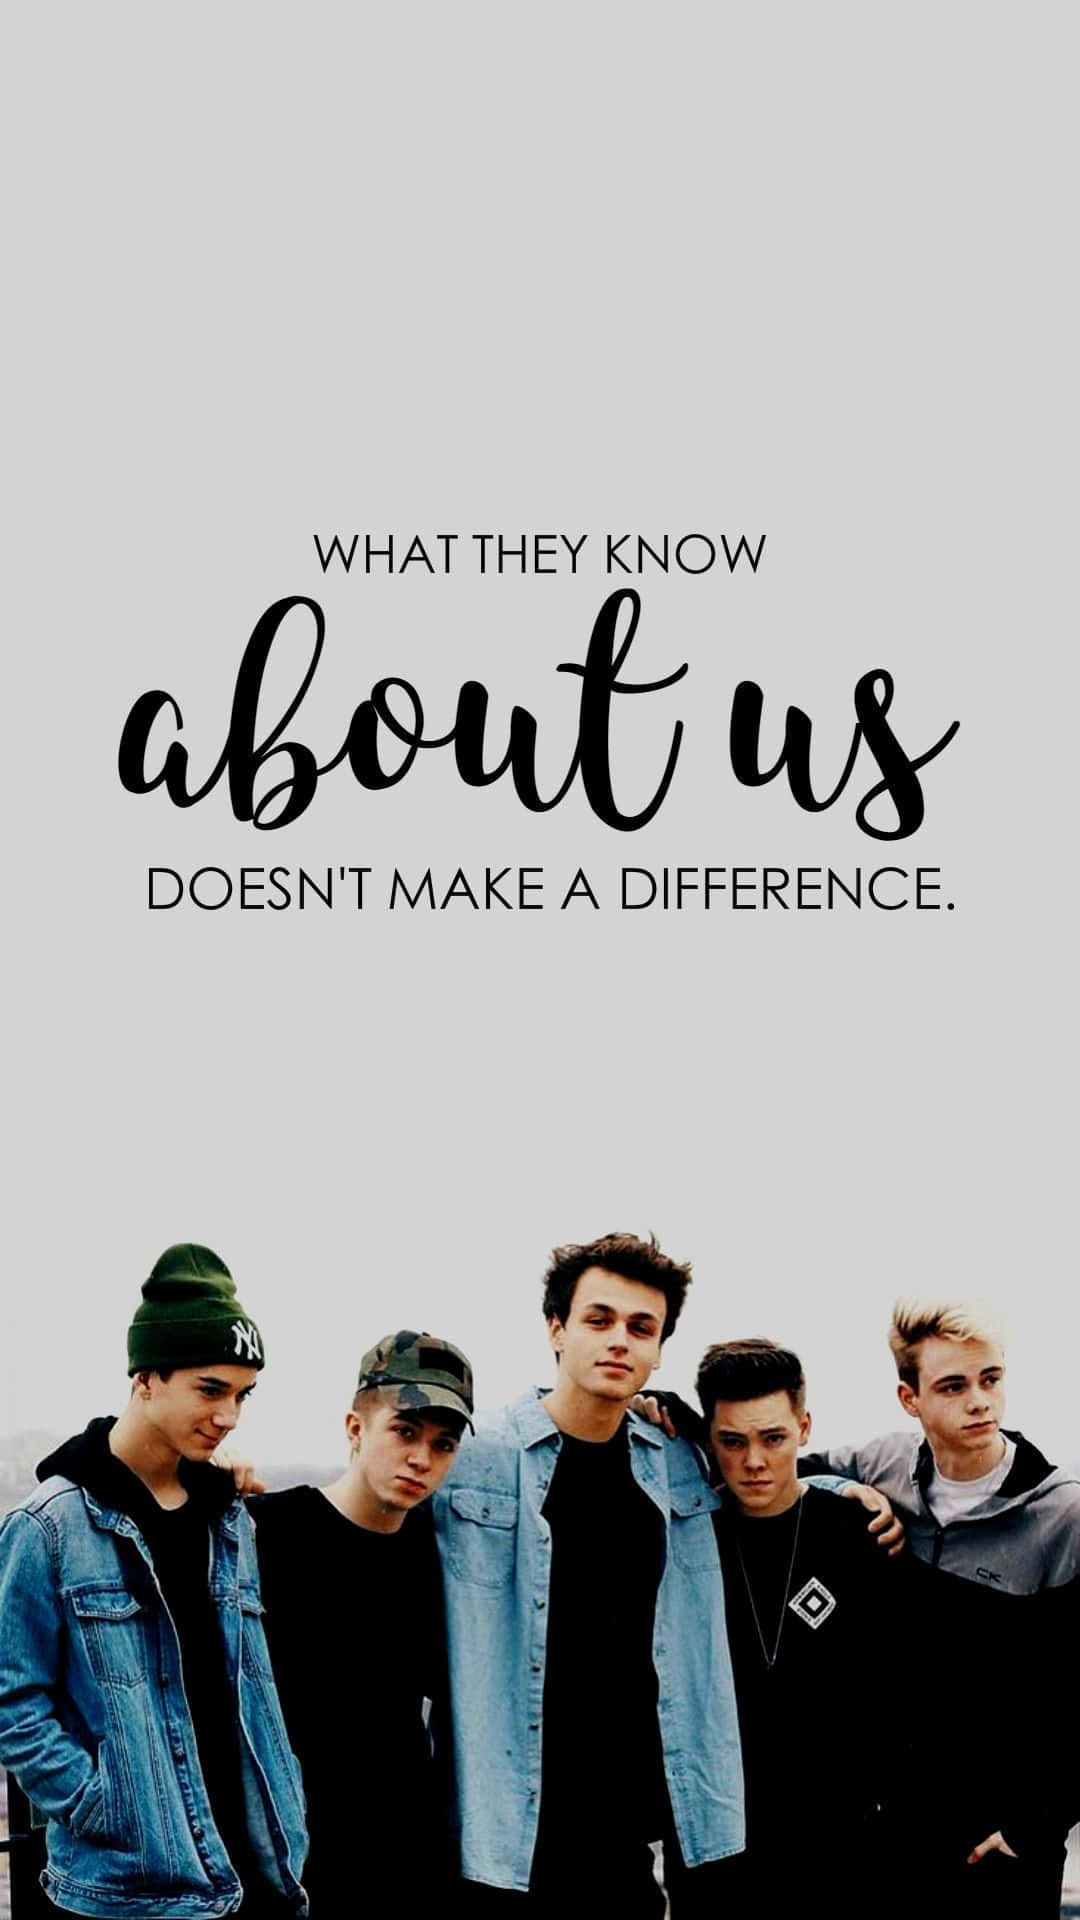 American Boy Band Why Don't We Something Different Wallpaper